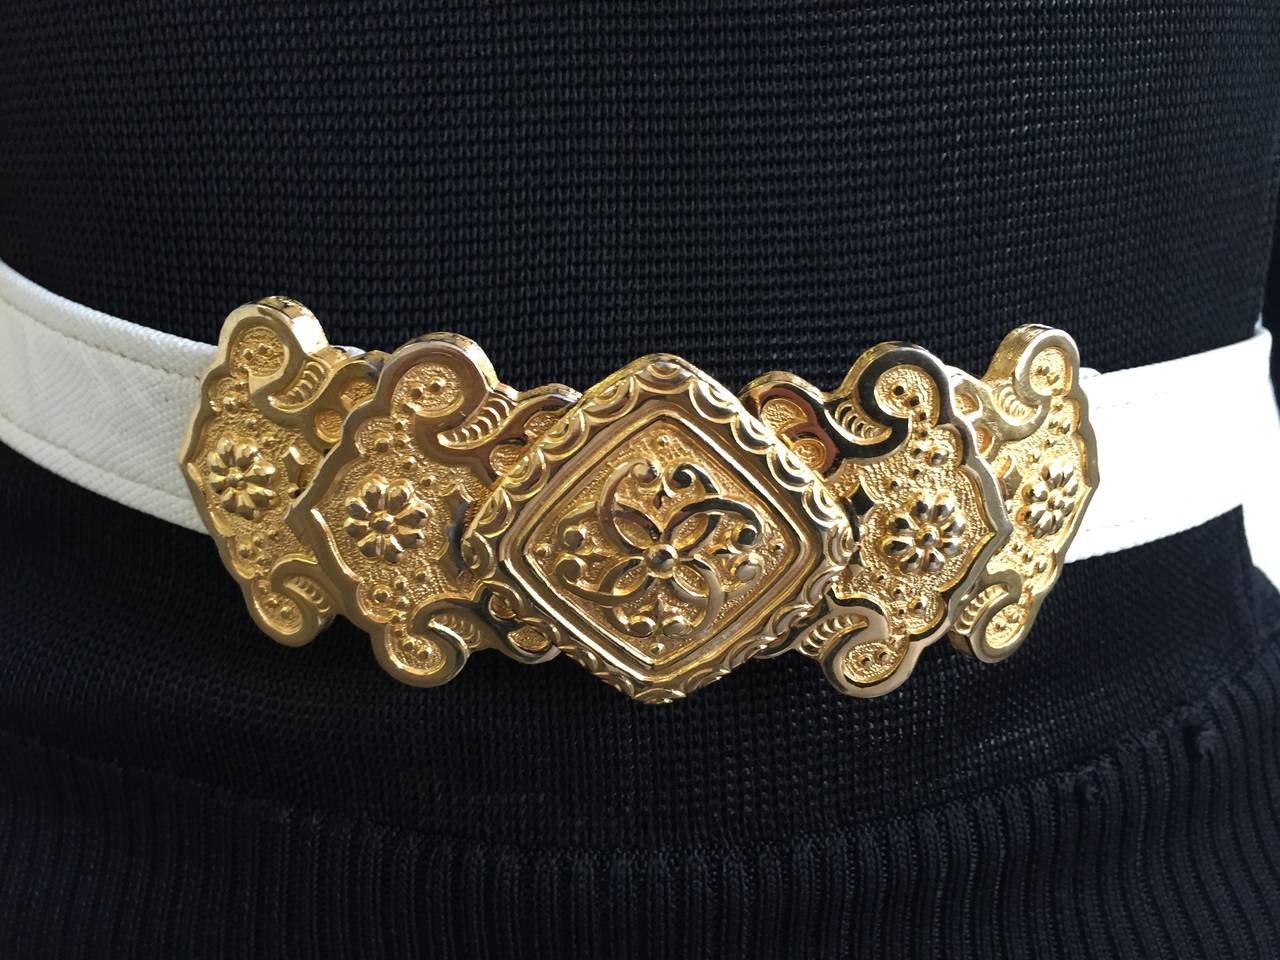 Alexis Kirk 1980s gold link buckle on white snake skin belt is adjustable. There are 2 sliders that adjust to size making this a practical stylish belt. There are 5 links in the buckle.
Measurements are:
4.1/2" buckle